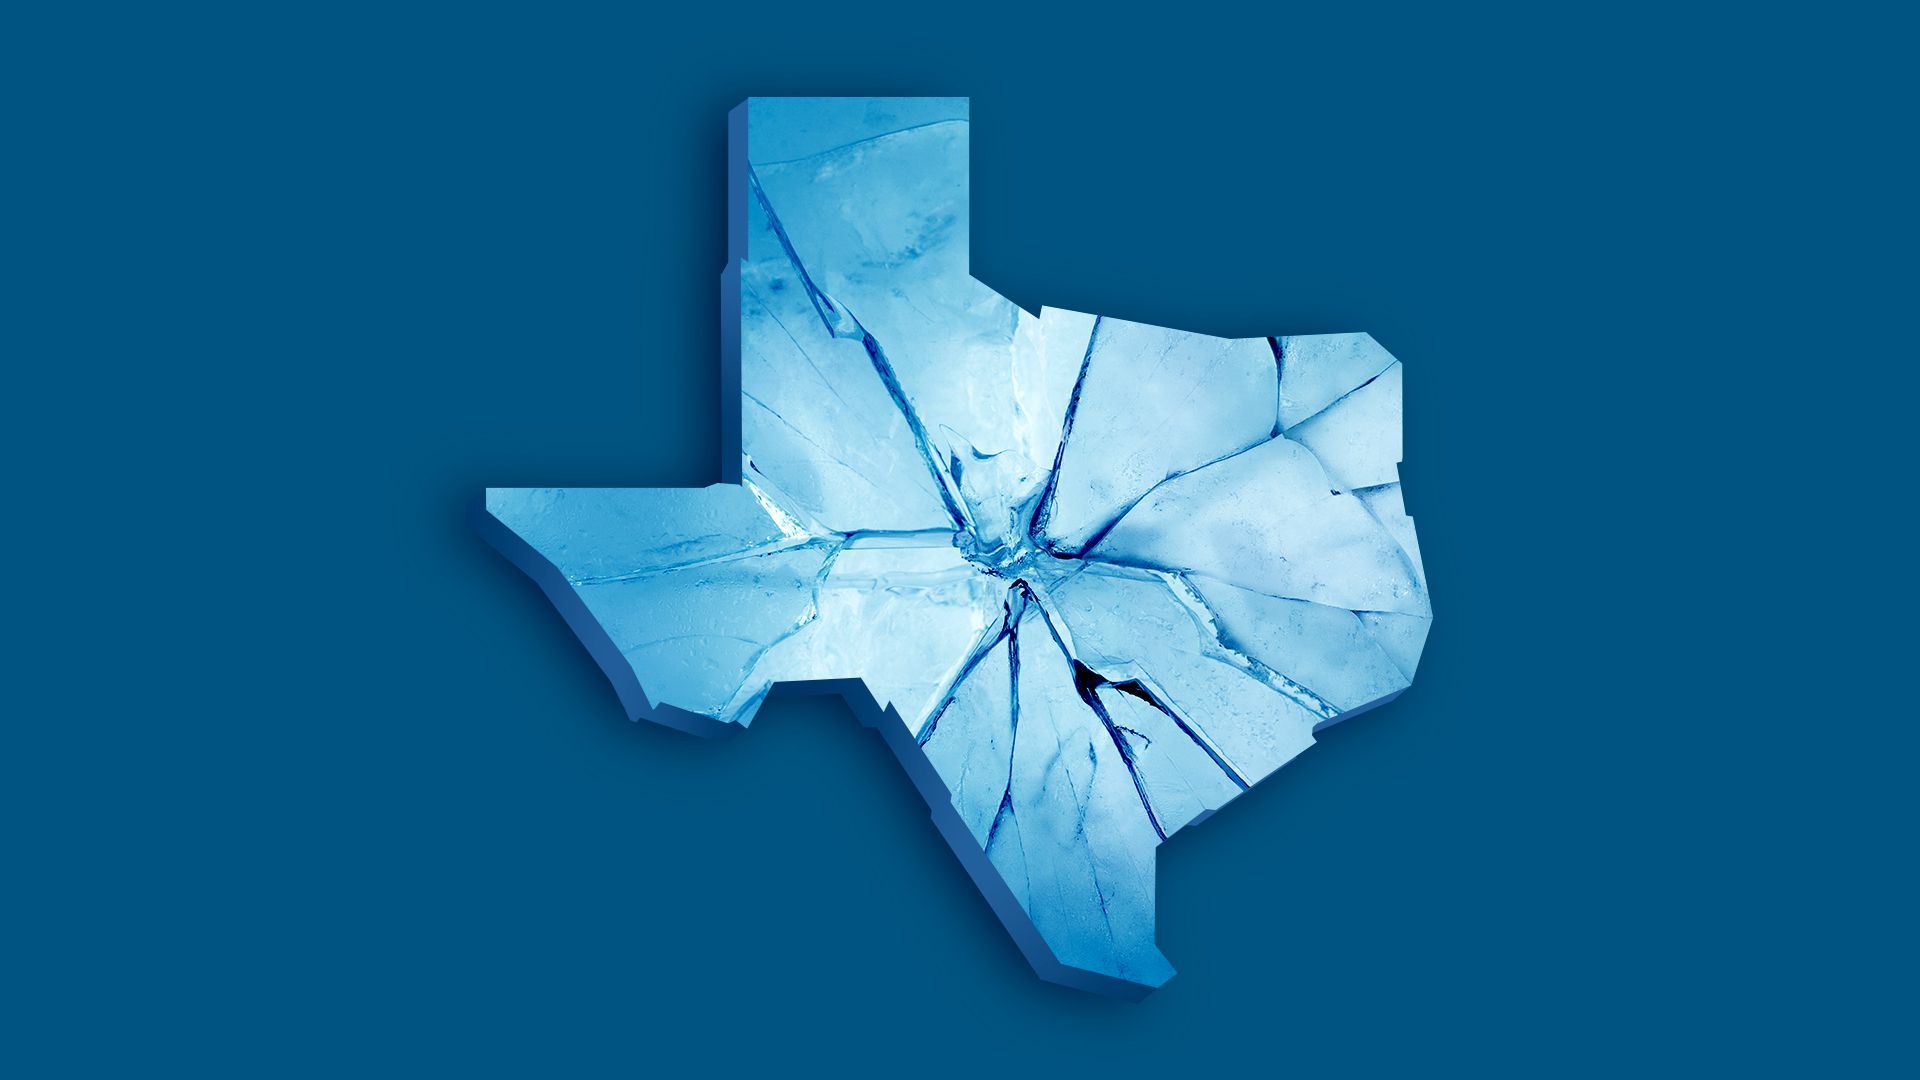 Illustration of fractured ice in the shape of Texas 